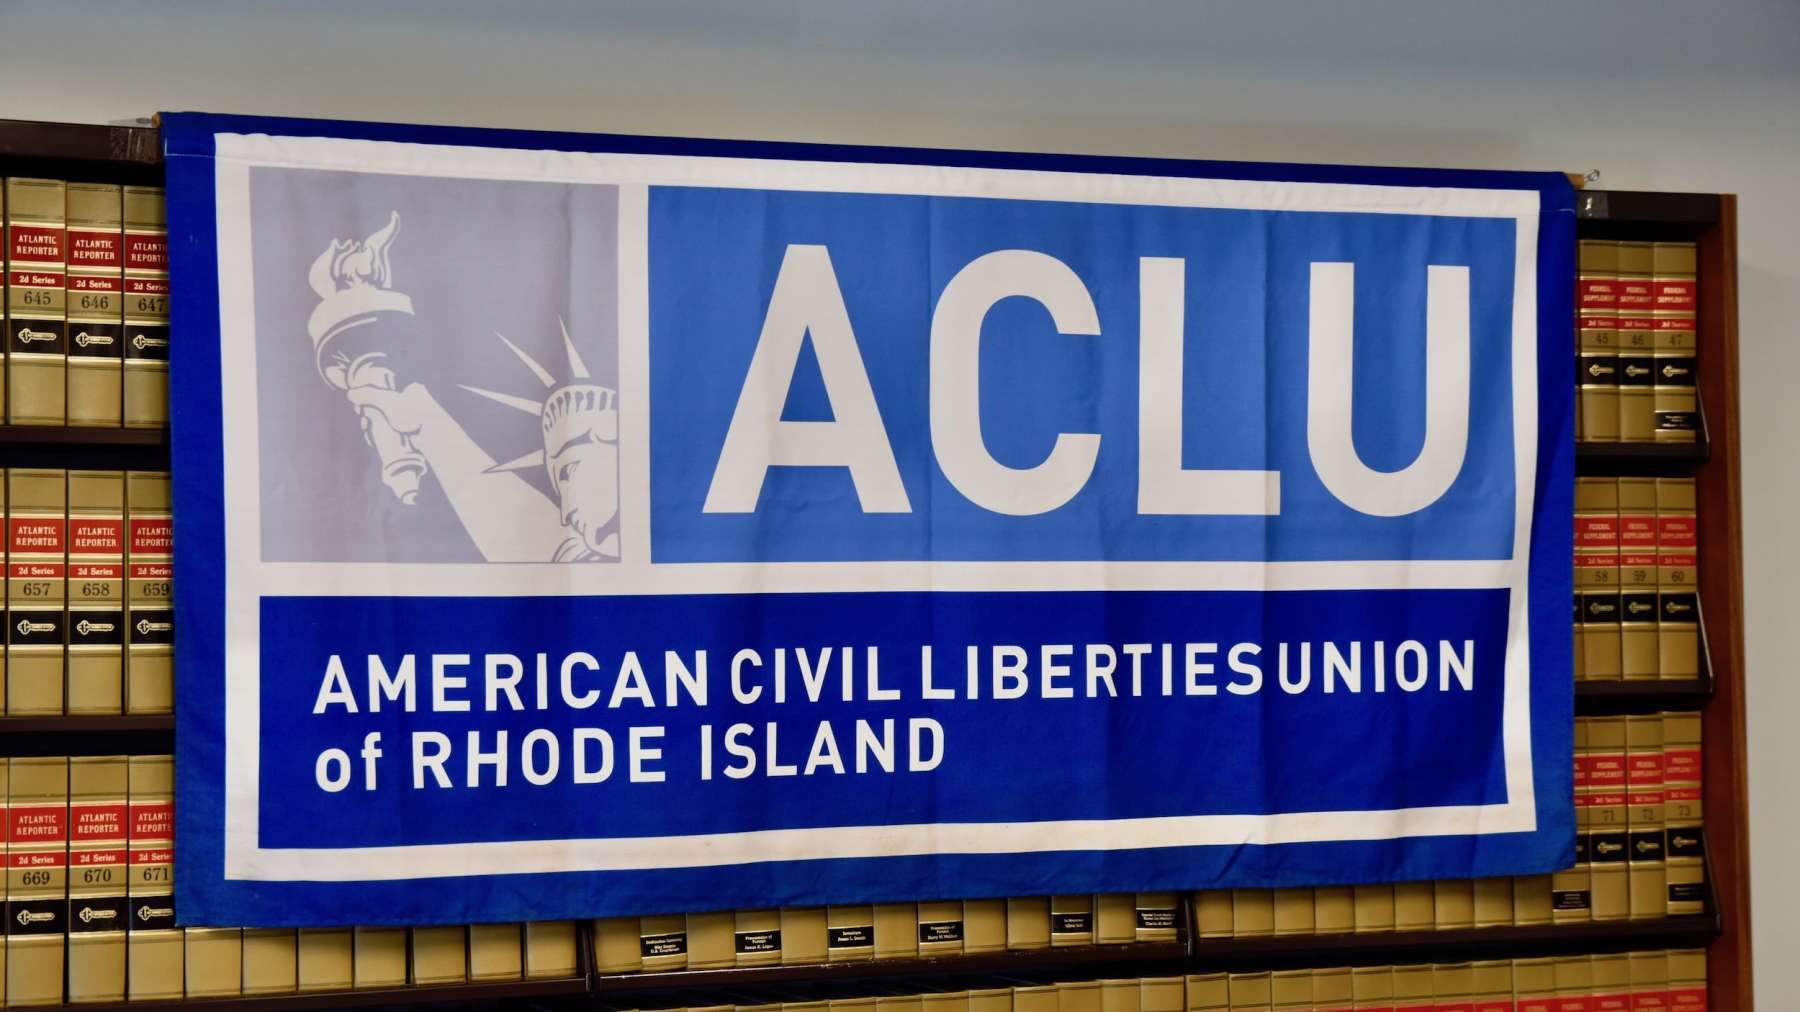 Rhode Island News: Judge orders release of unlawfully incarcerated juvenile offenders